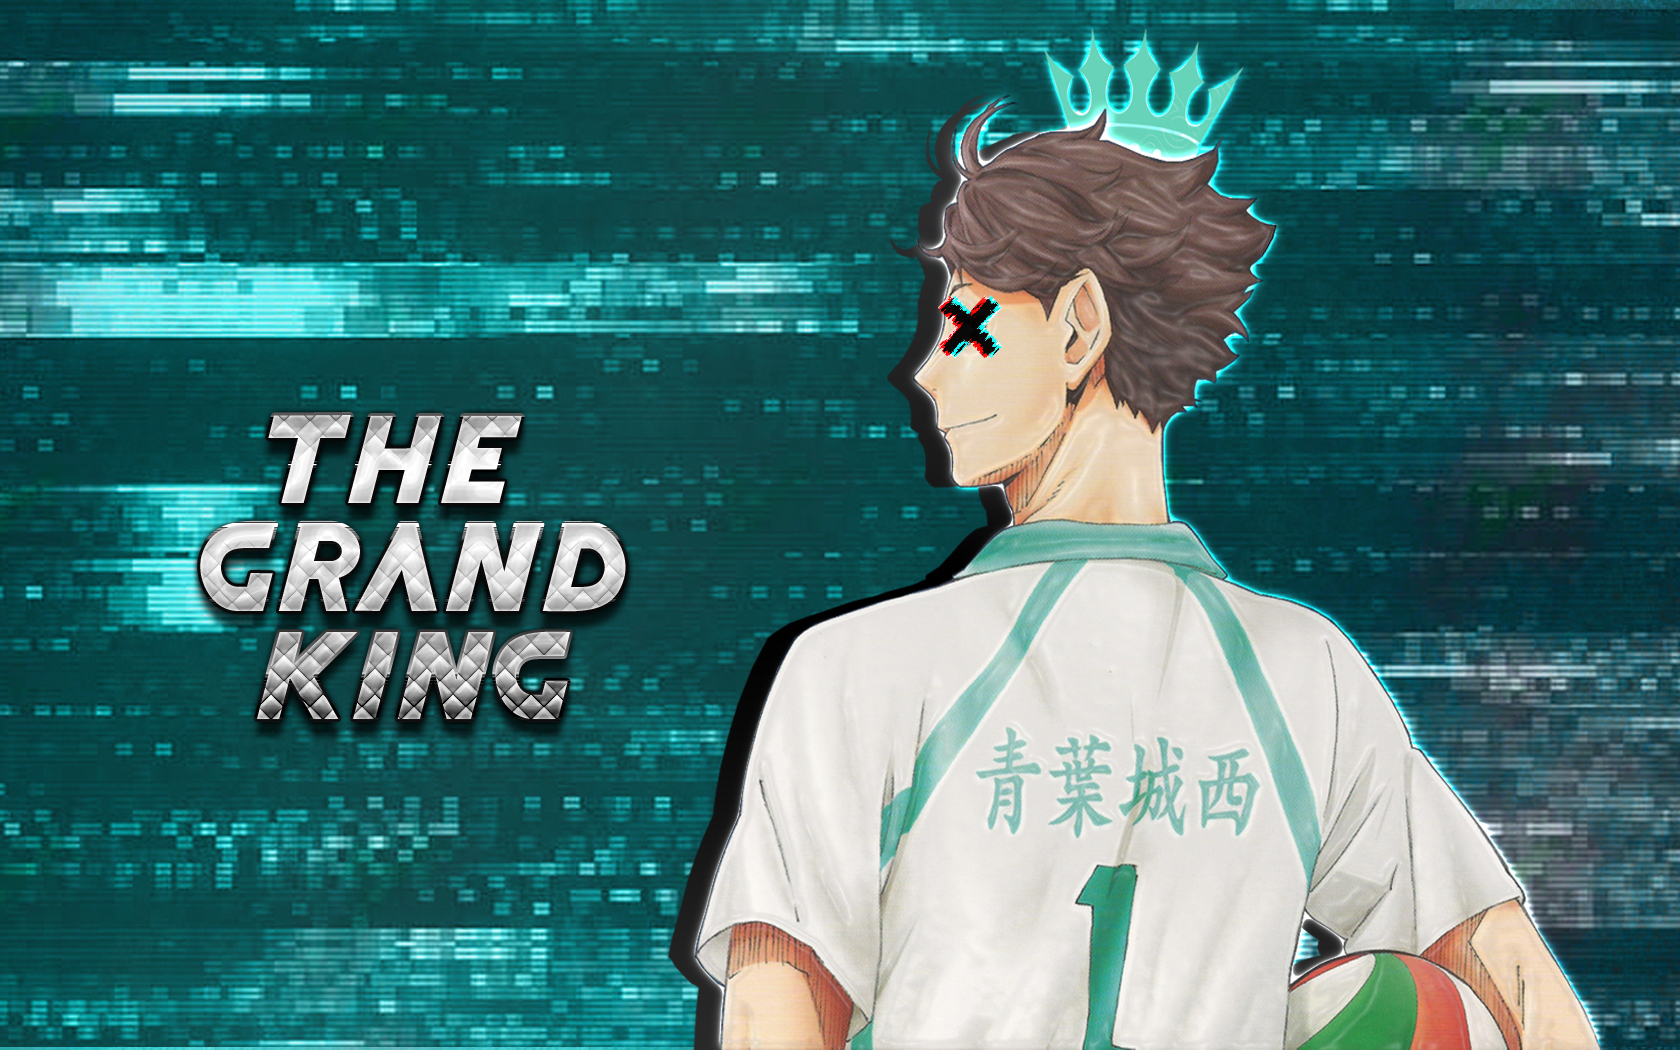 The Grand King by Oikawallpapers